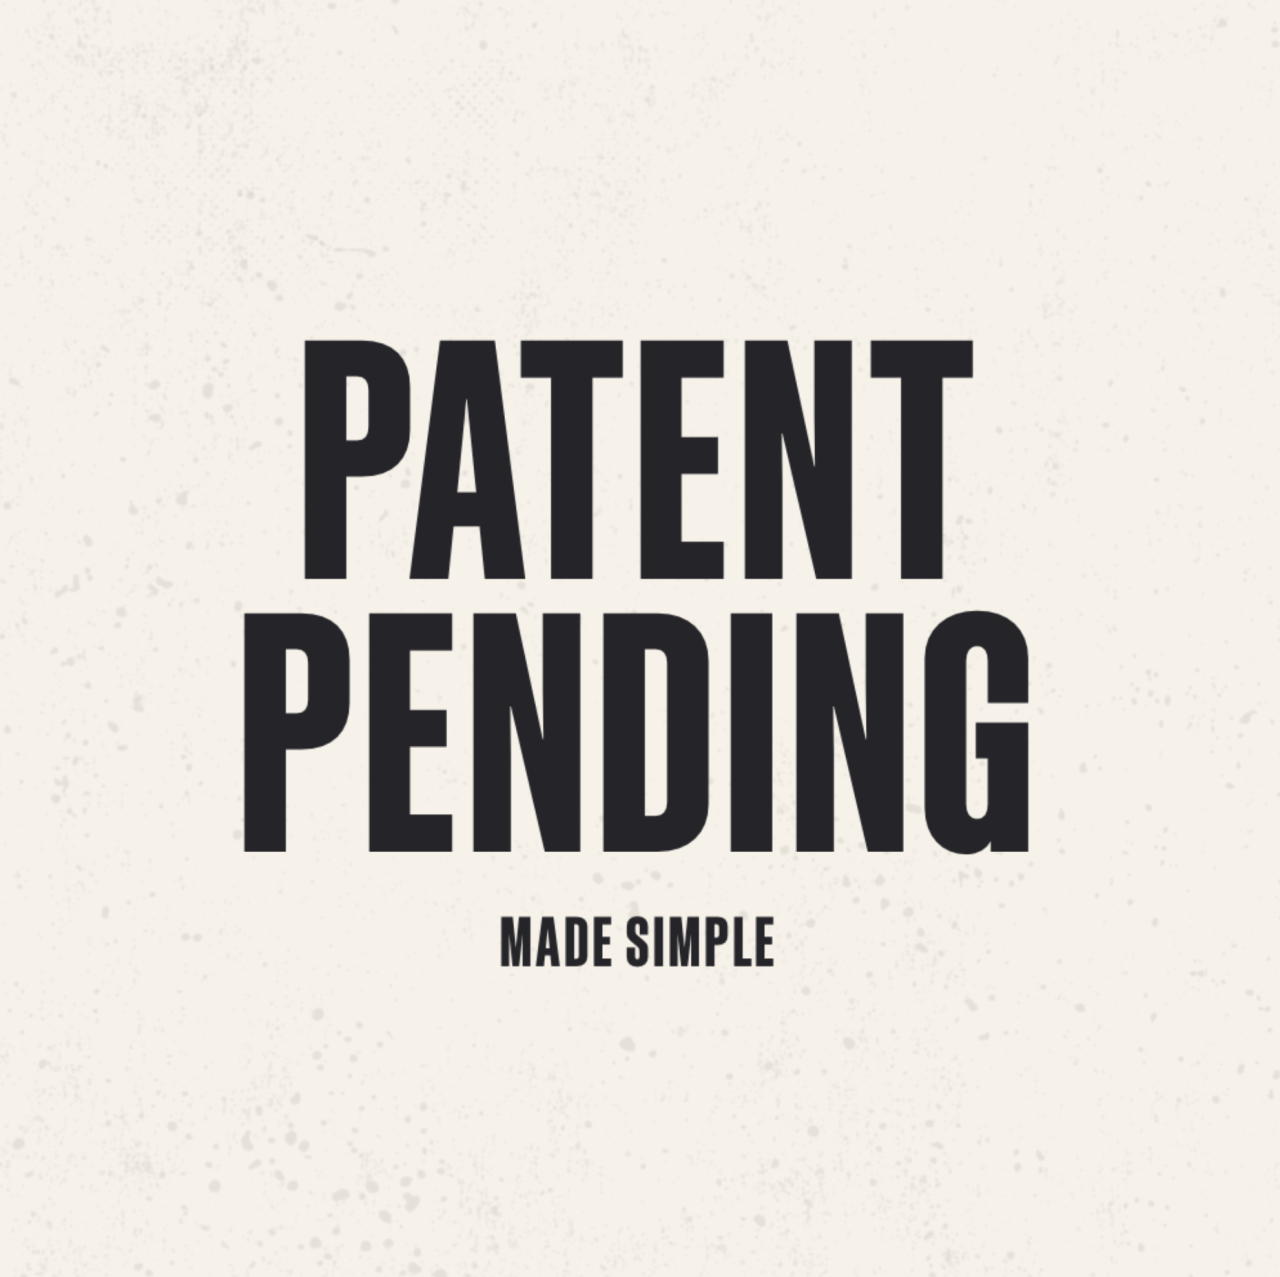 Patent Pending Made Simple.